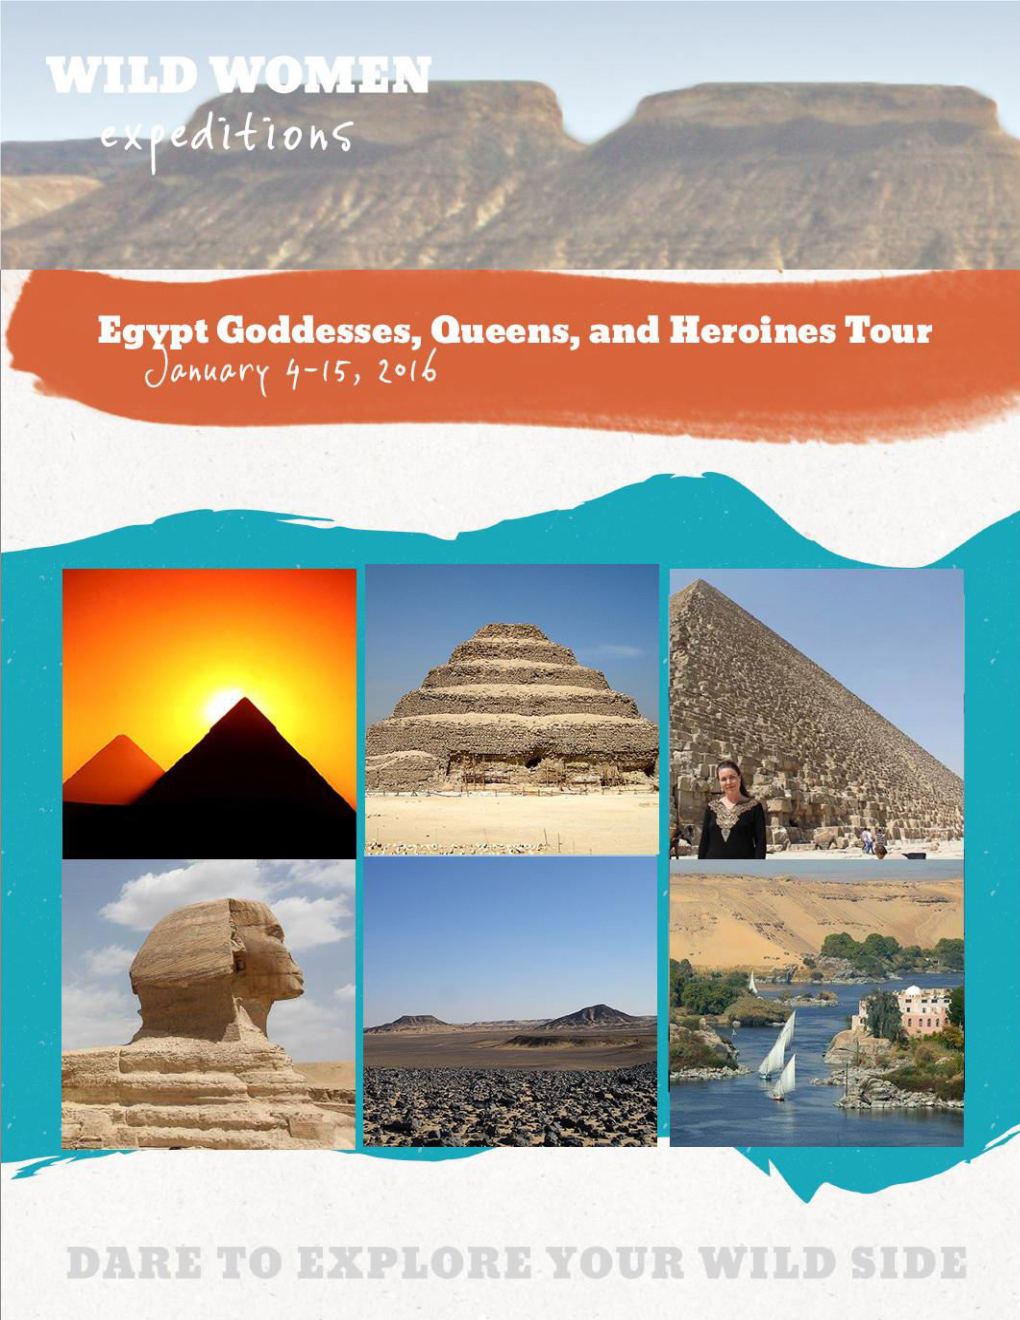 Details for Your Egypt Adventure